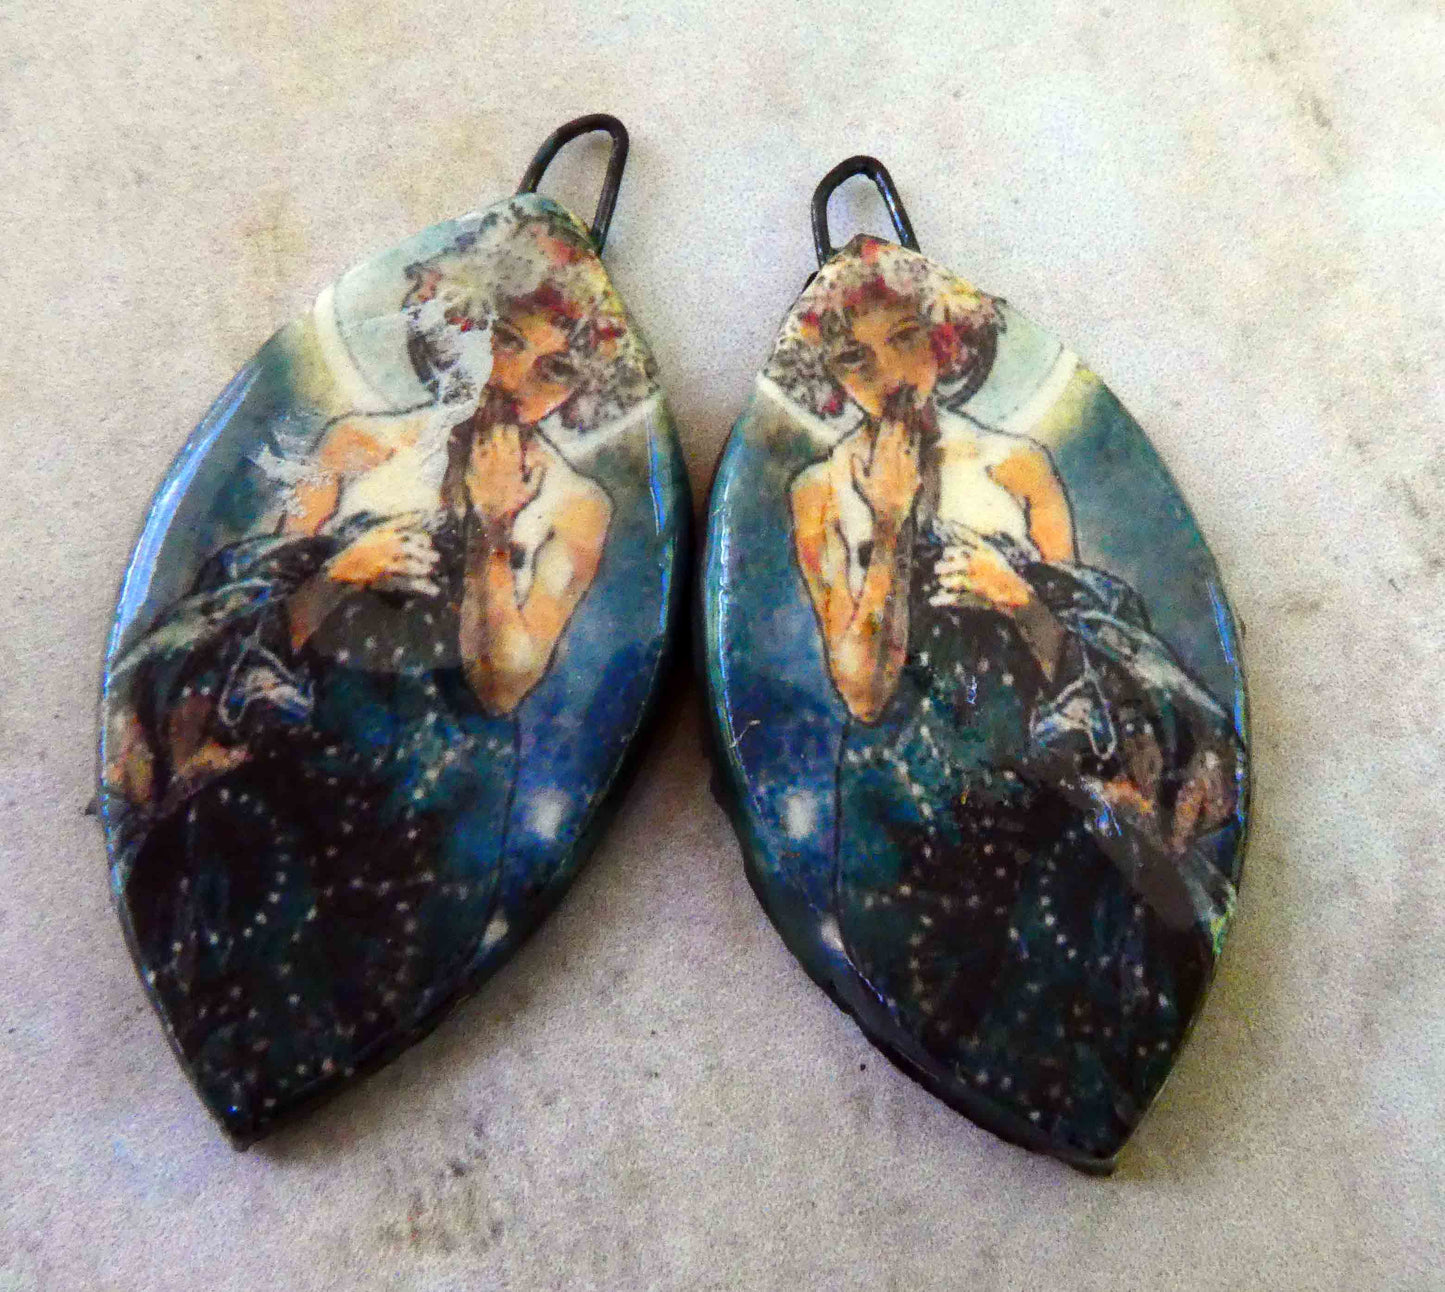 Ceramic Decal Mucha Earring Droppers #3